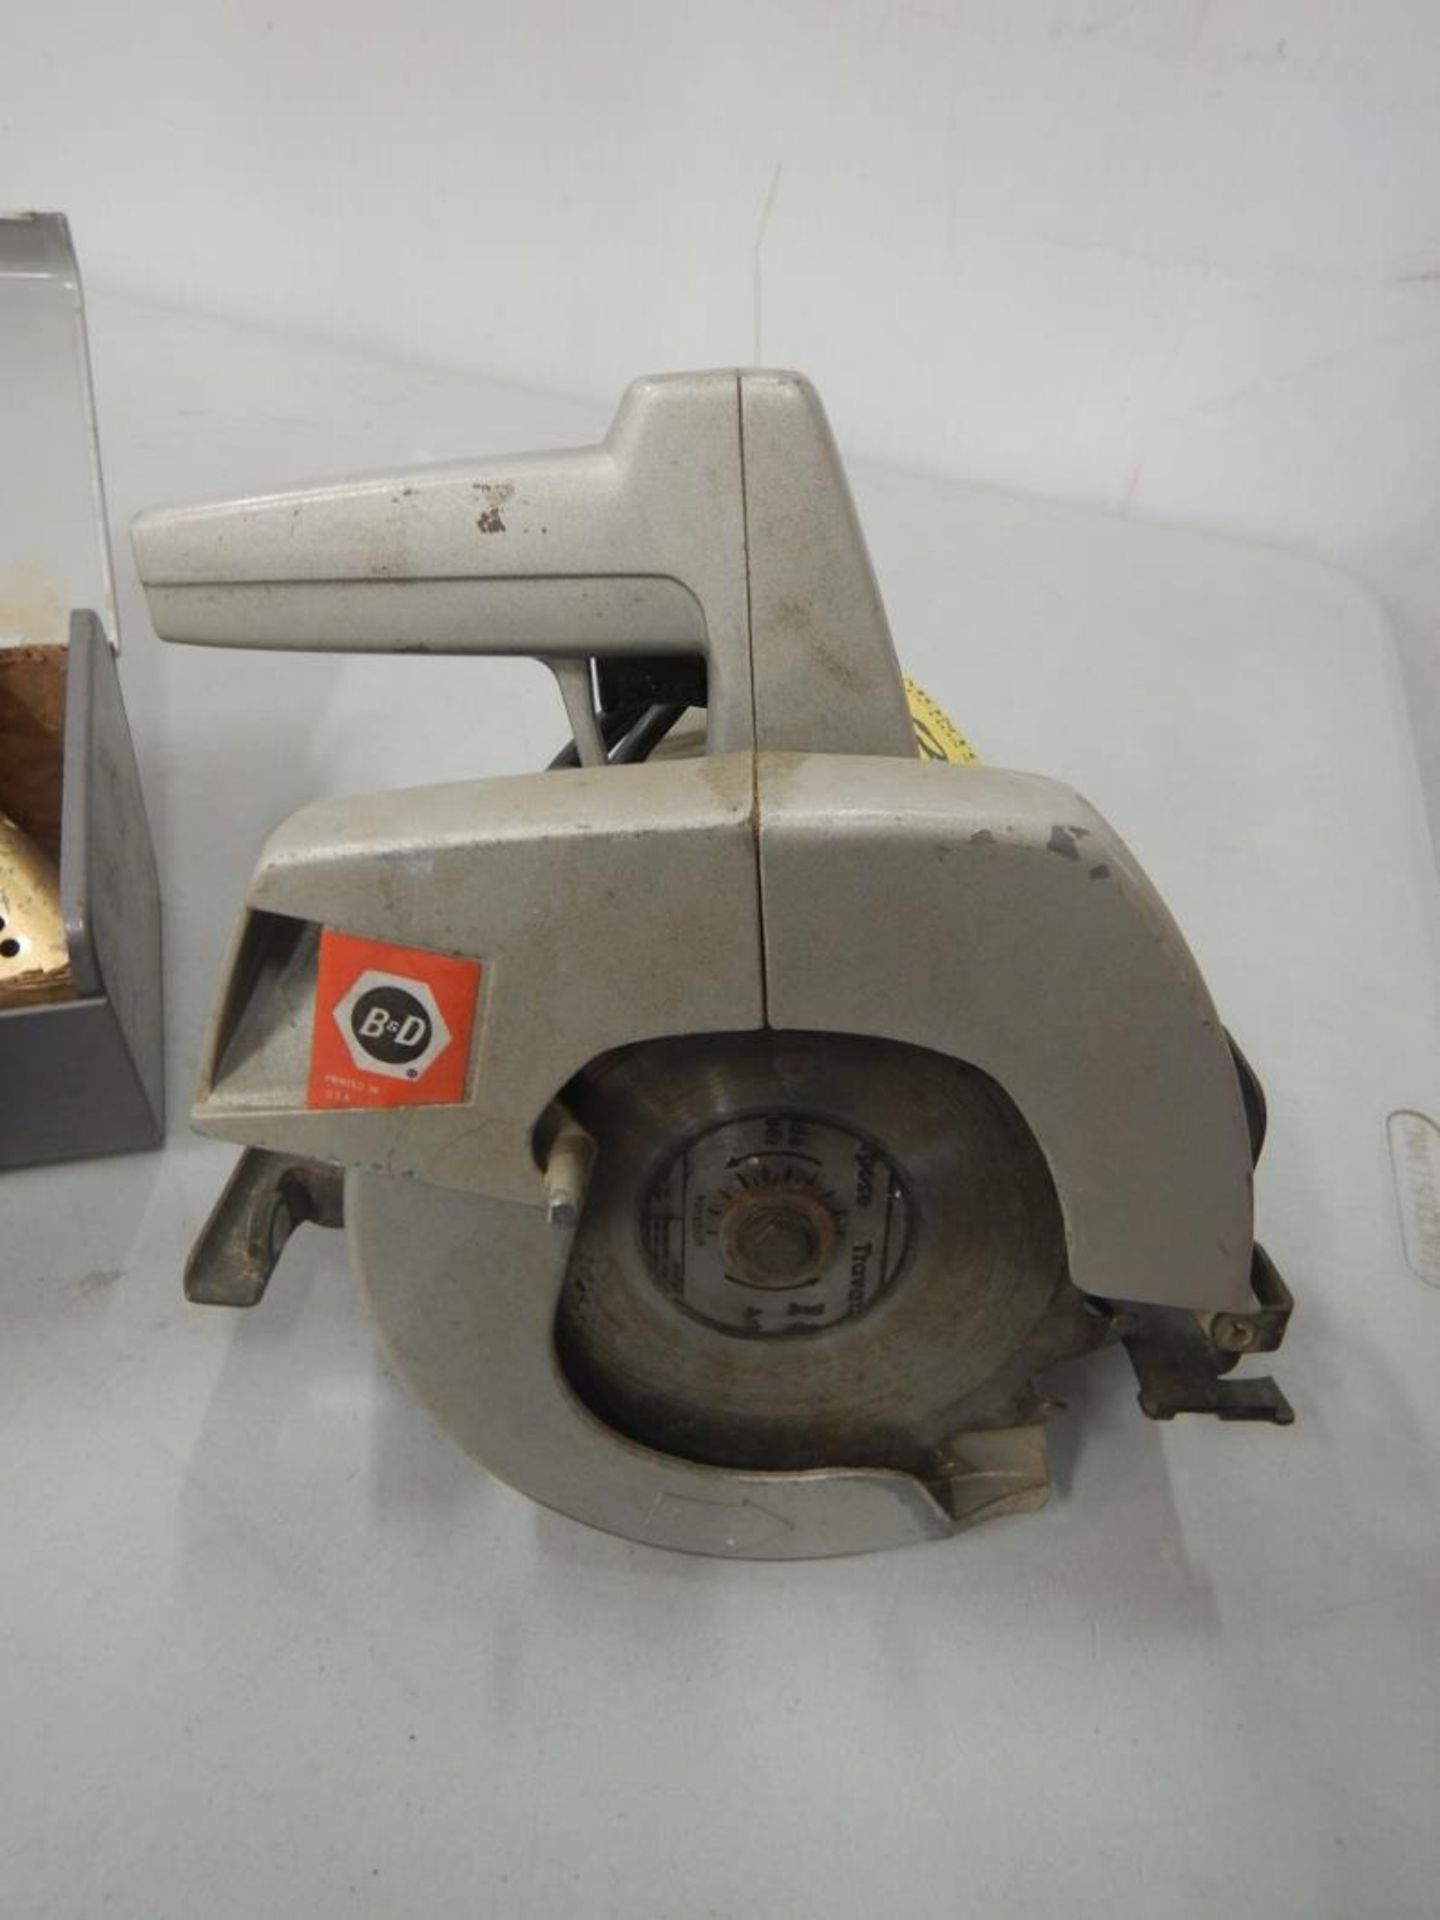 VINTAGE B&D CIRCULAR SAW AND DRILL, DRILL PUMP, ETC. - Image 4 of 11